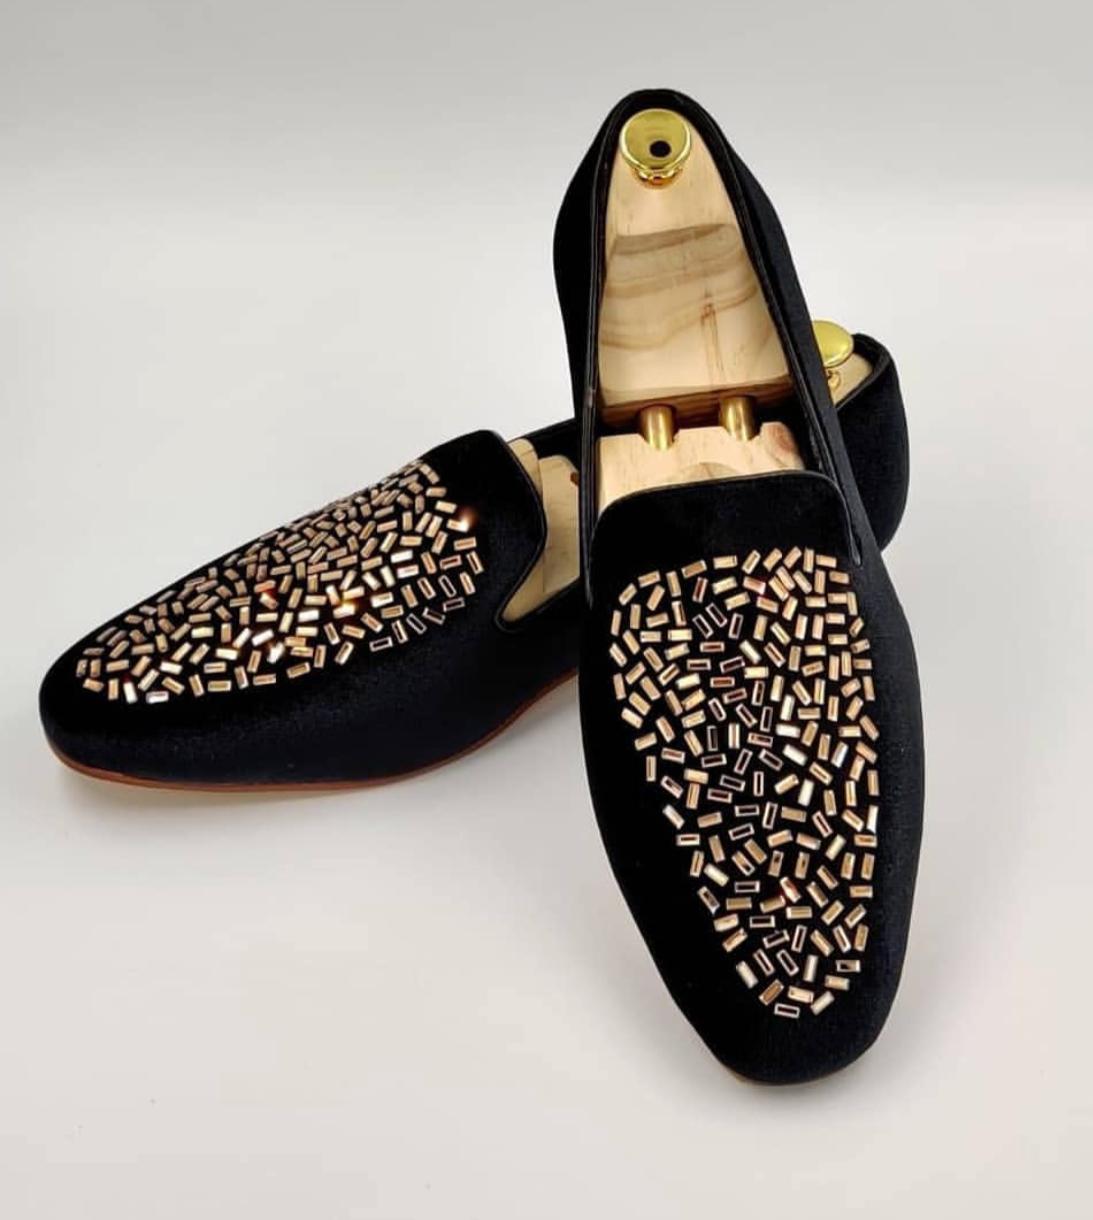 Buy Now Fashion Studded Suede Loafer Shoes For Partywear And Casualwear - Sunglassesmart